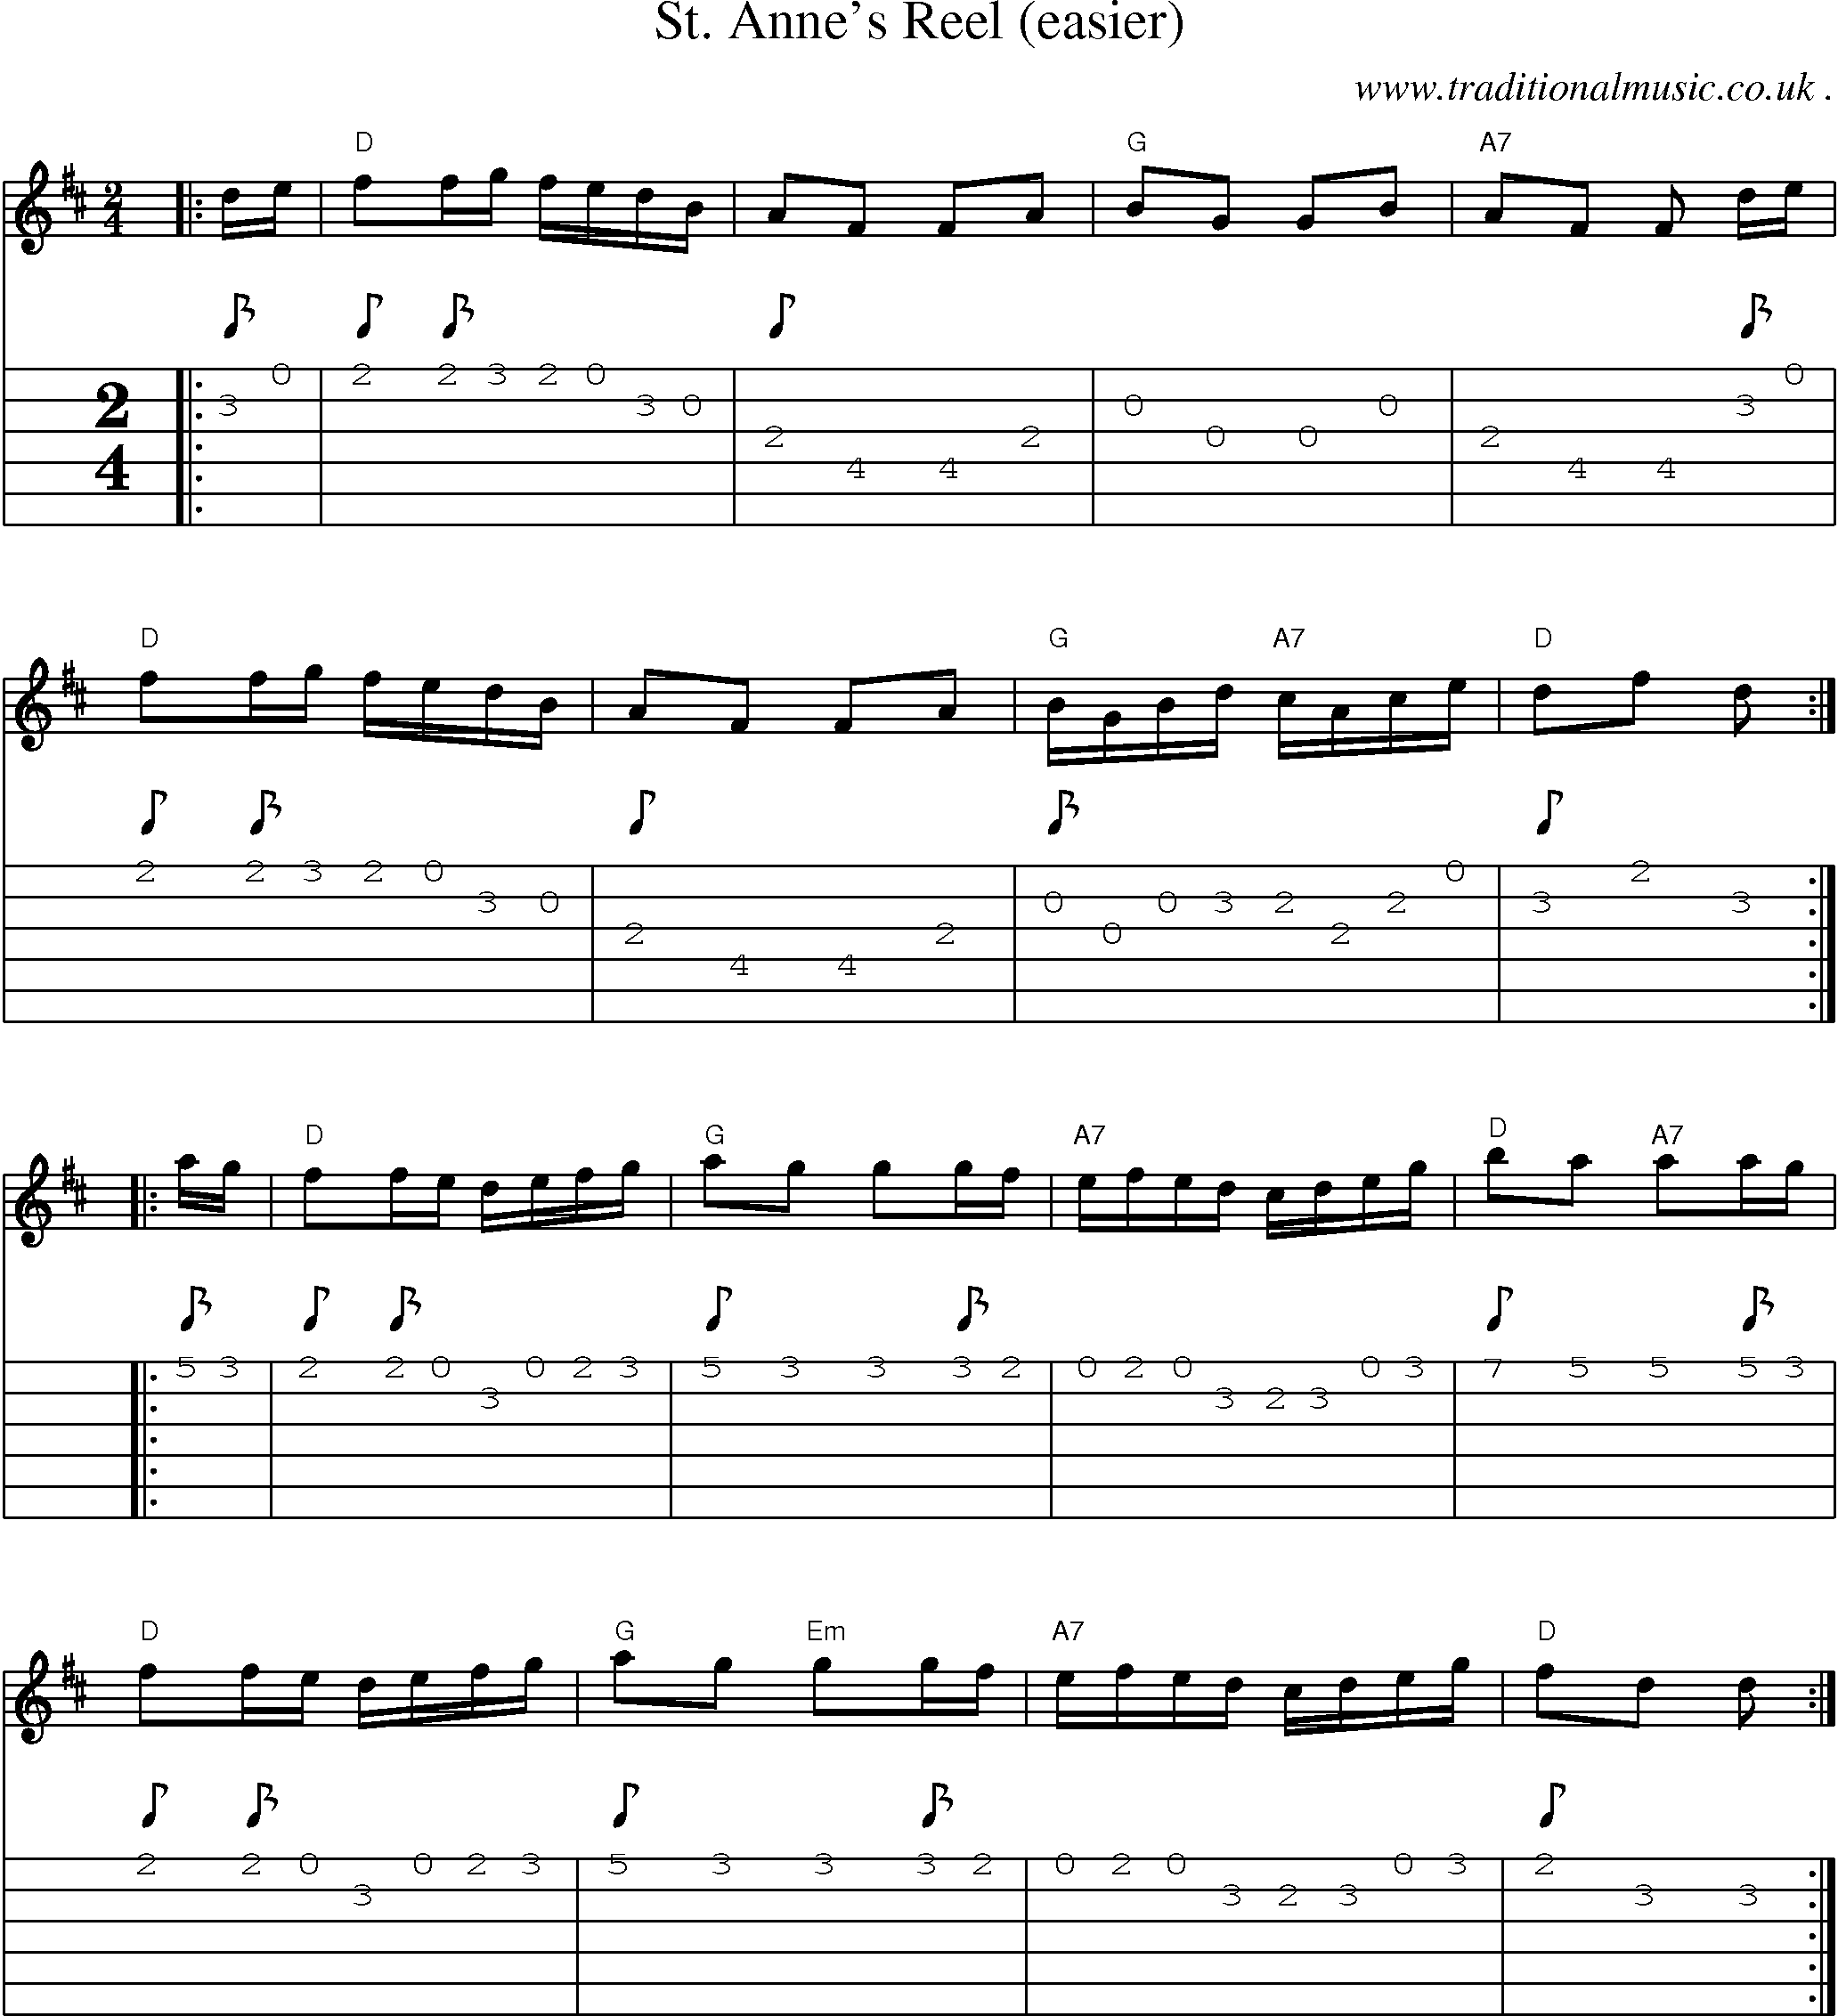 Music Score and Guitar Tabs for St Annes Reel (easier)